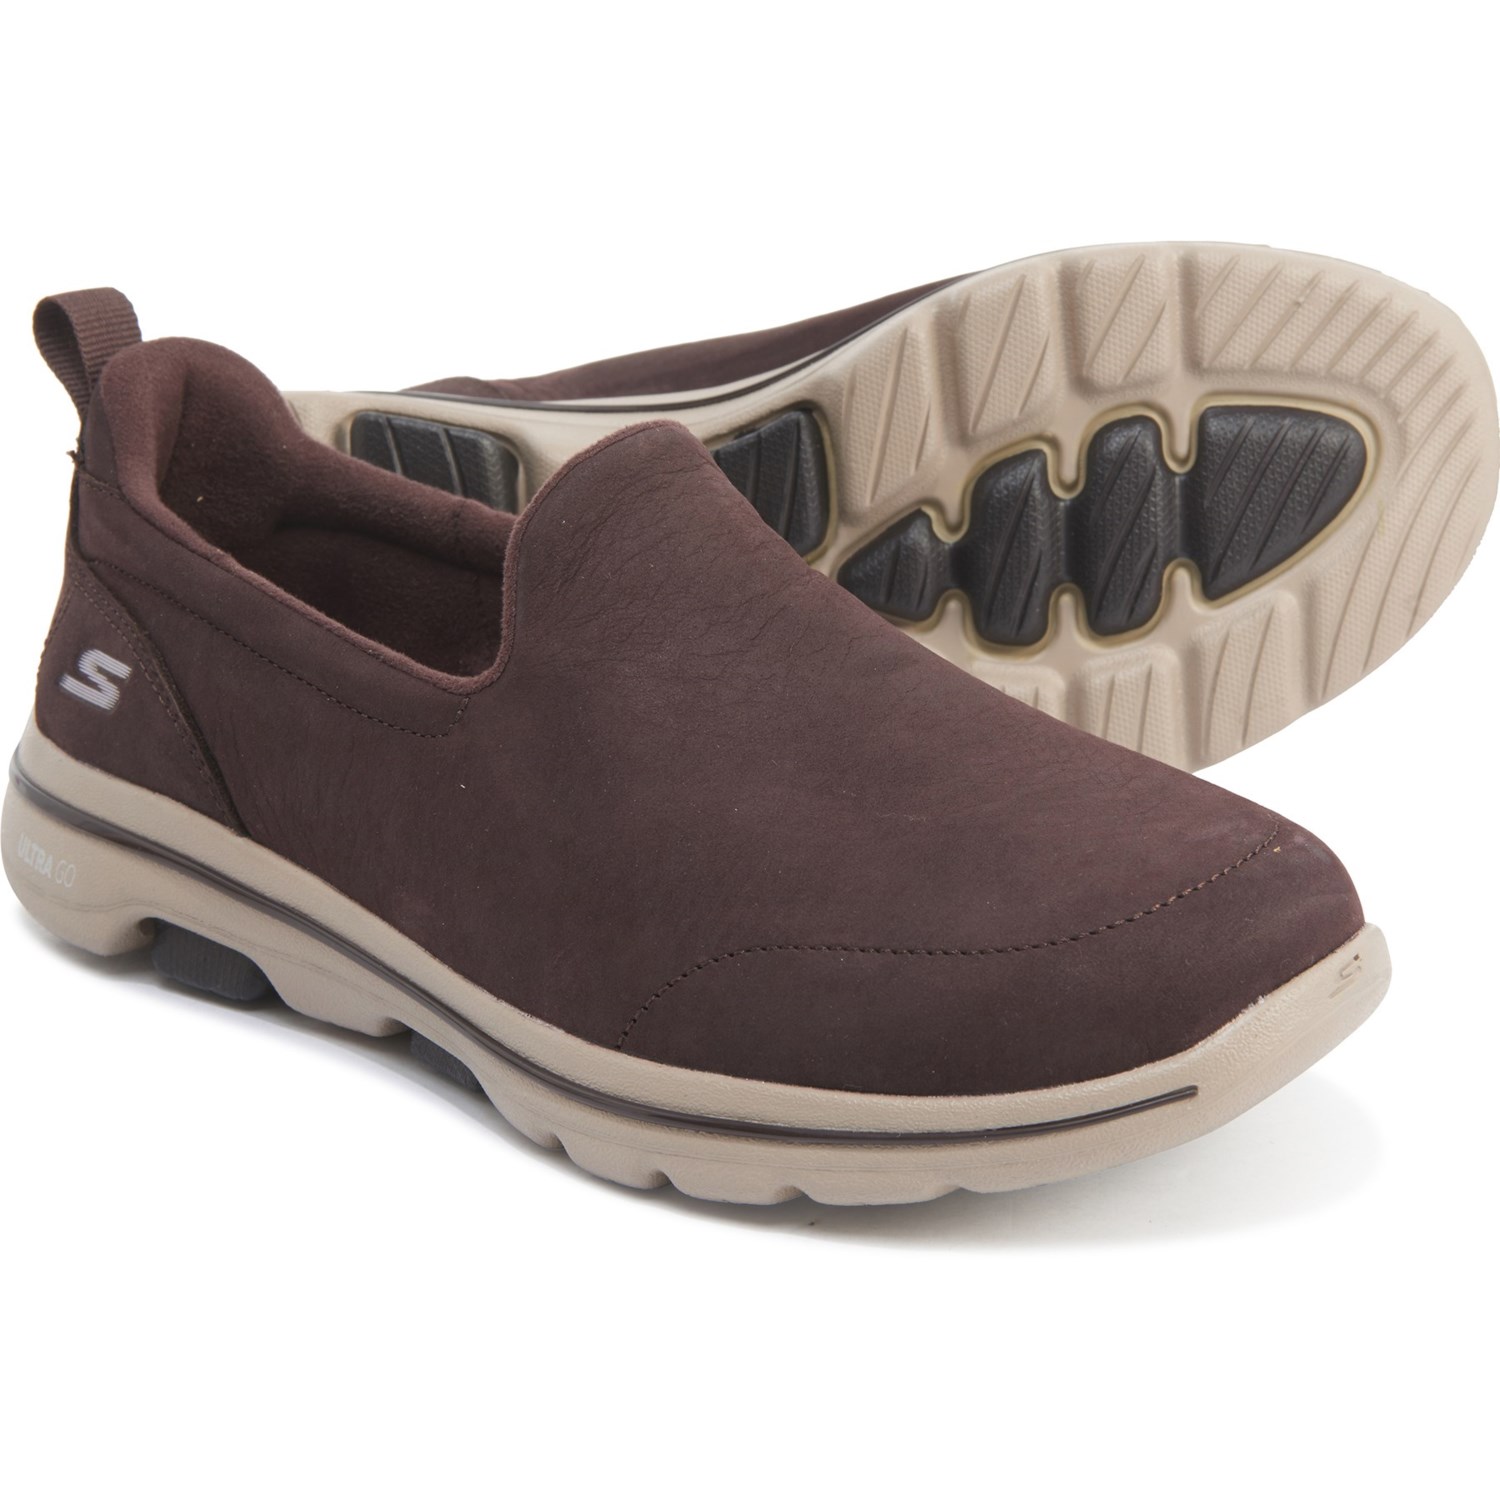 skechers gowalk undercover leather slip on shoes